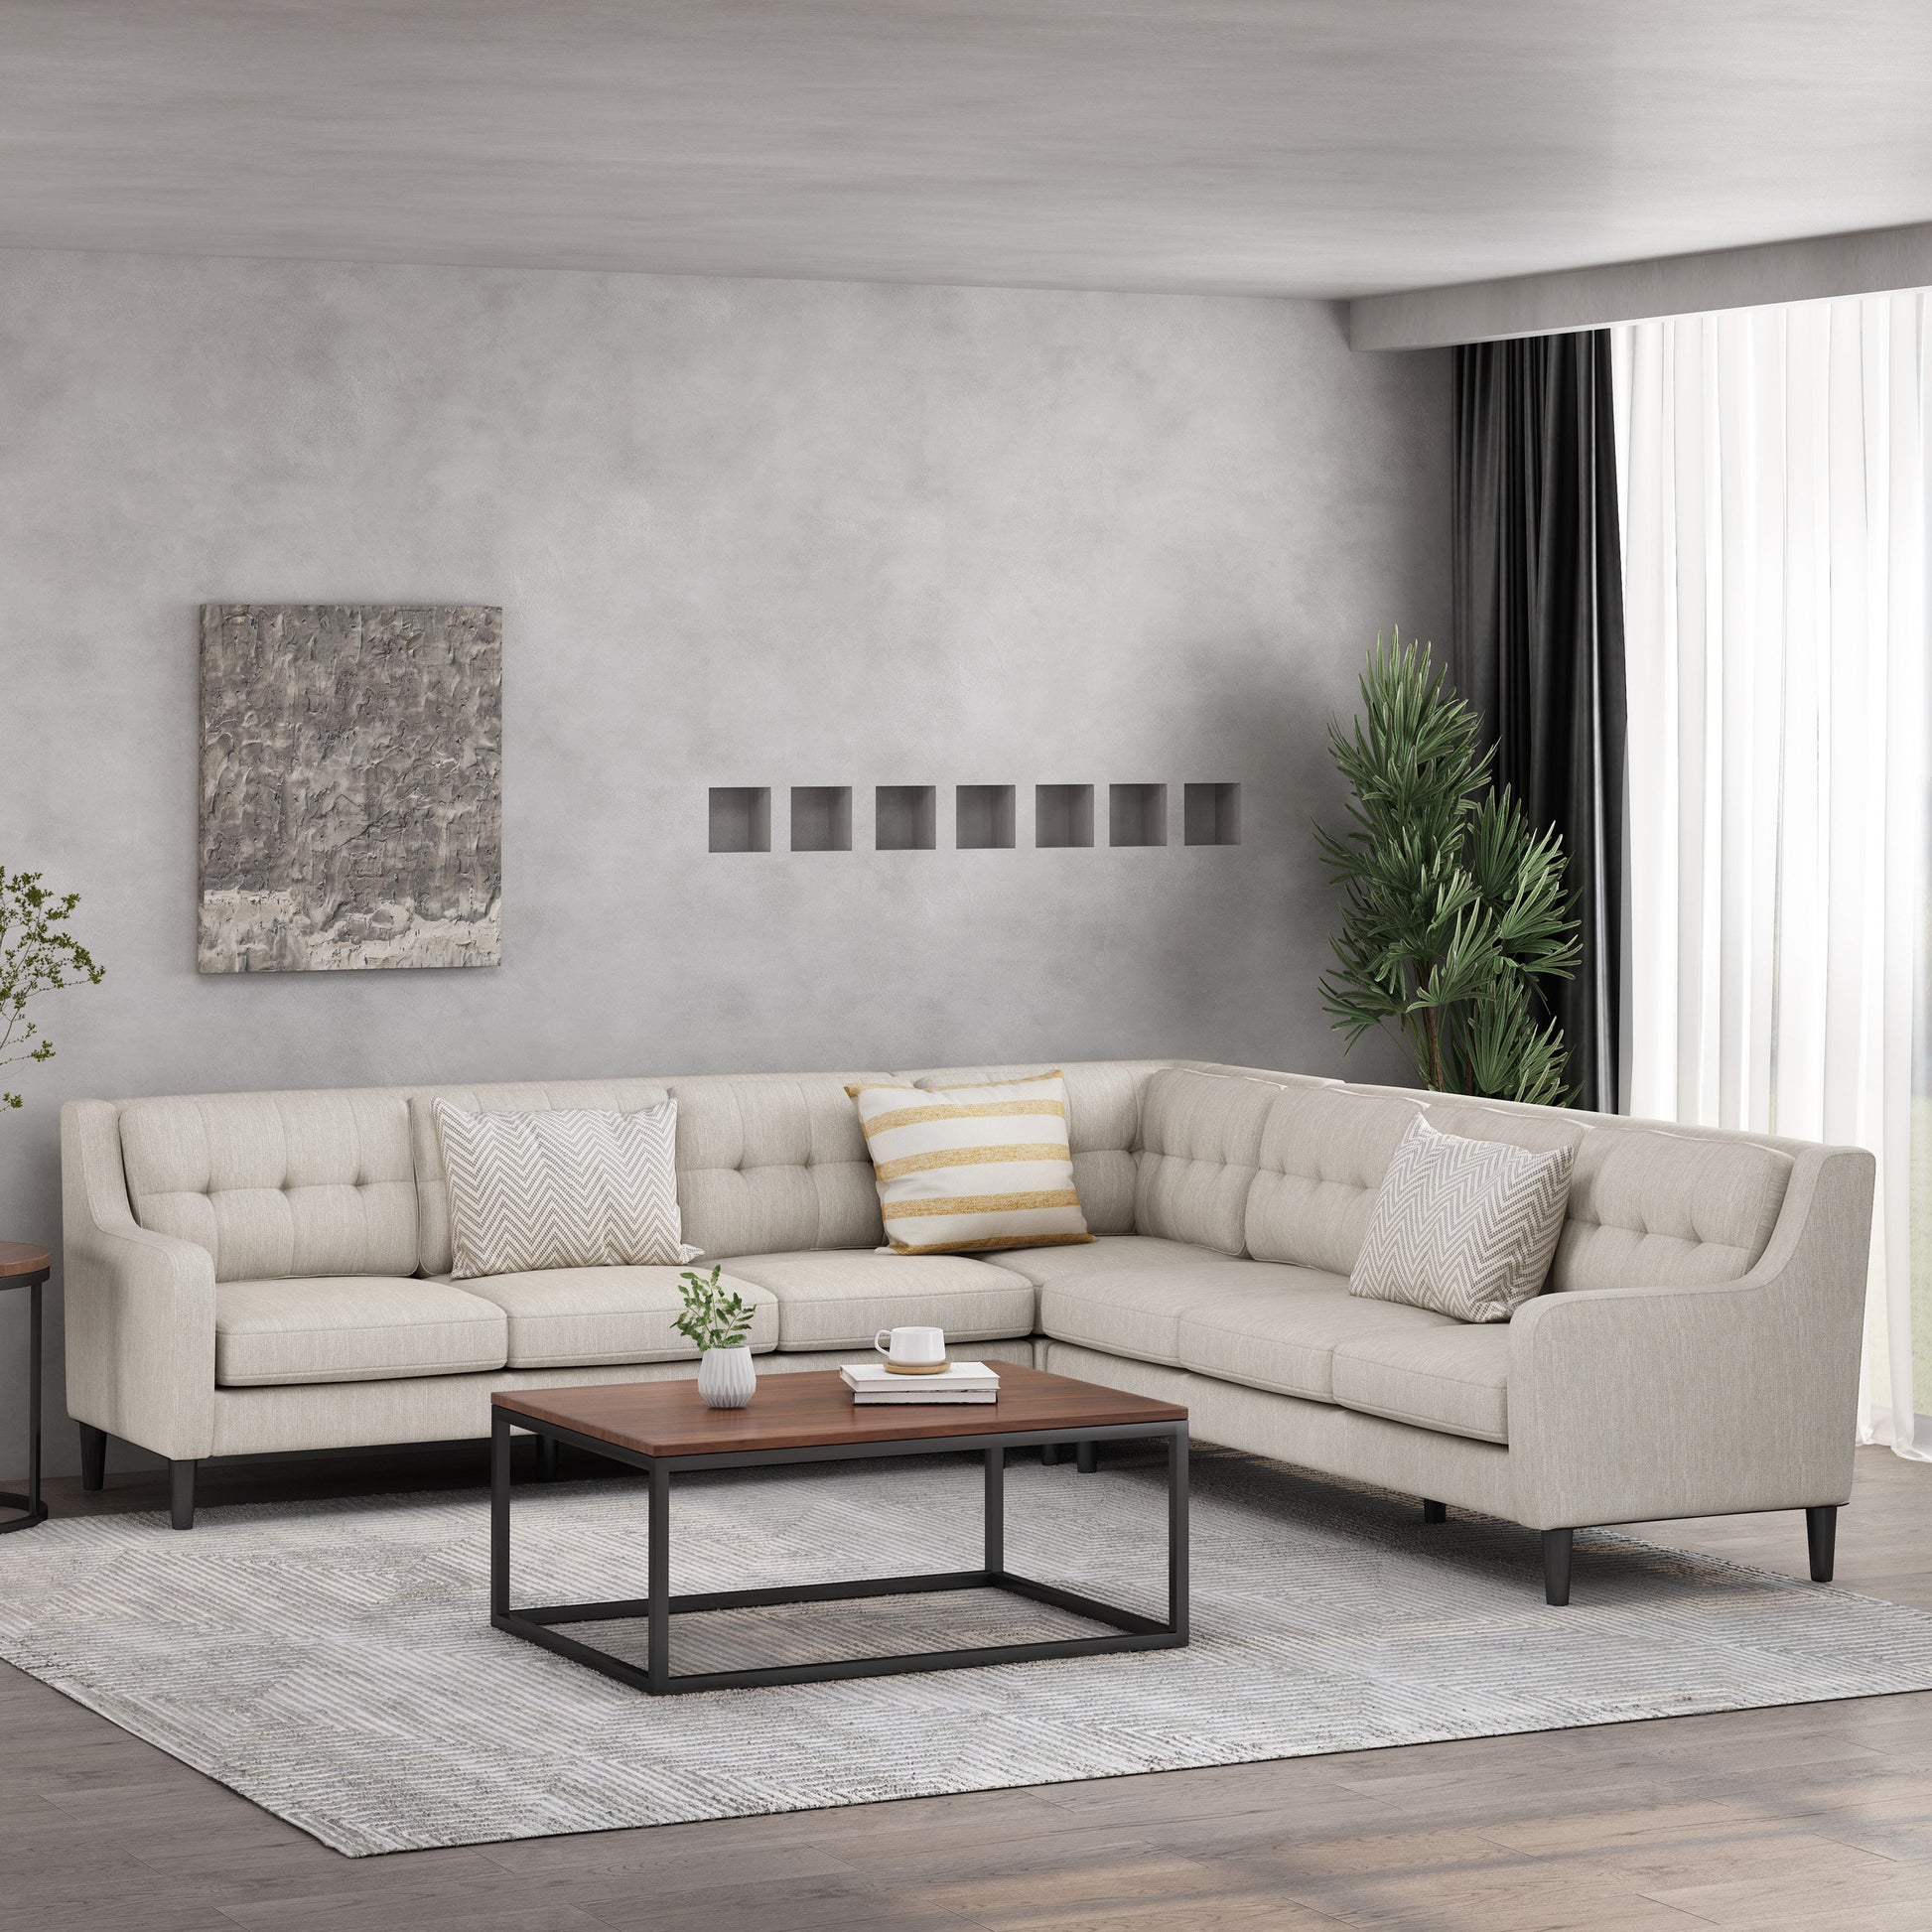 Mccone Contemporary Tufted Fabric 7 Seater Sectional Sofa Set Gdfstudio